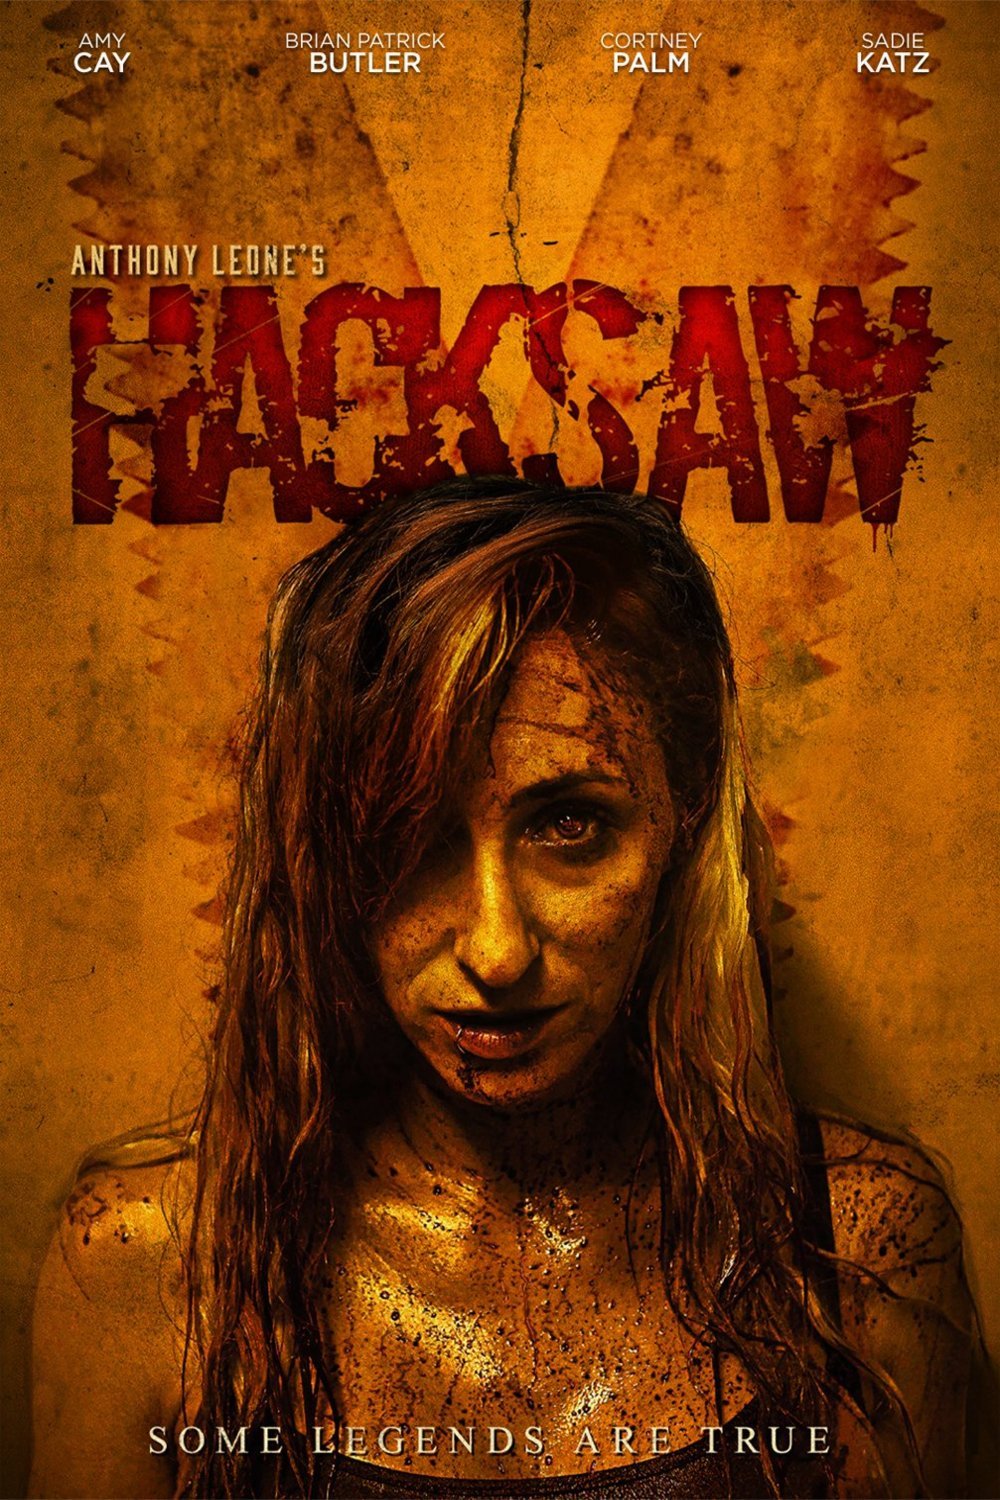 Poster of the movie Hacksaw